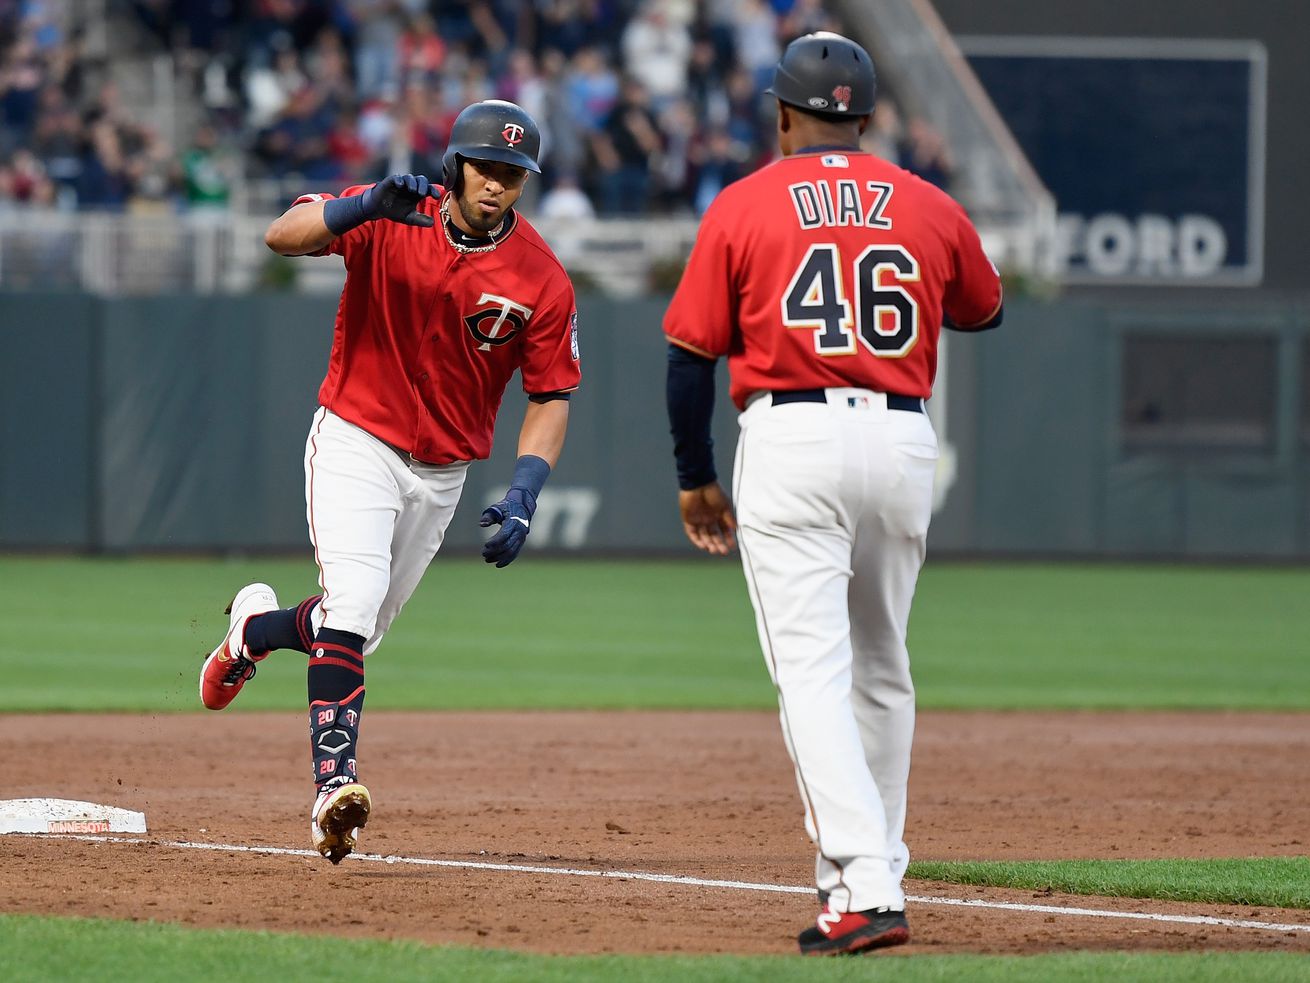 The Twins’ Eddie Rosario rounds the bases after tying Friday’s game against the White Sox at 4-4 with a third-inning home run.